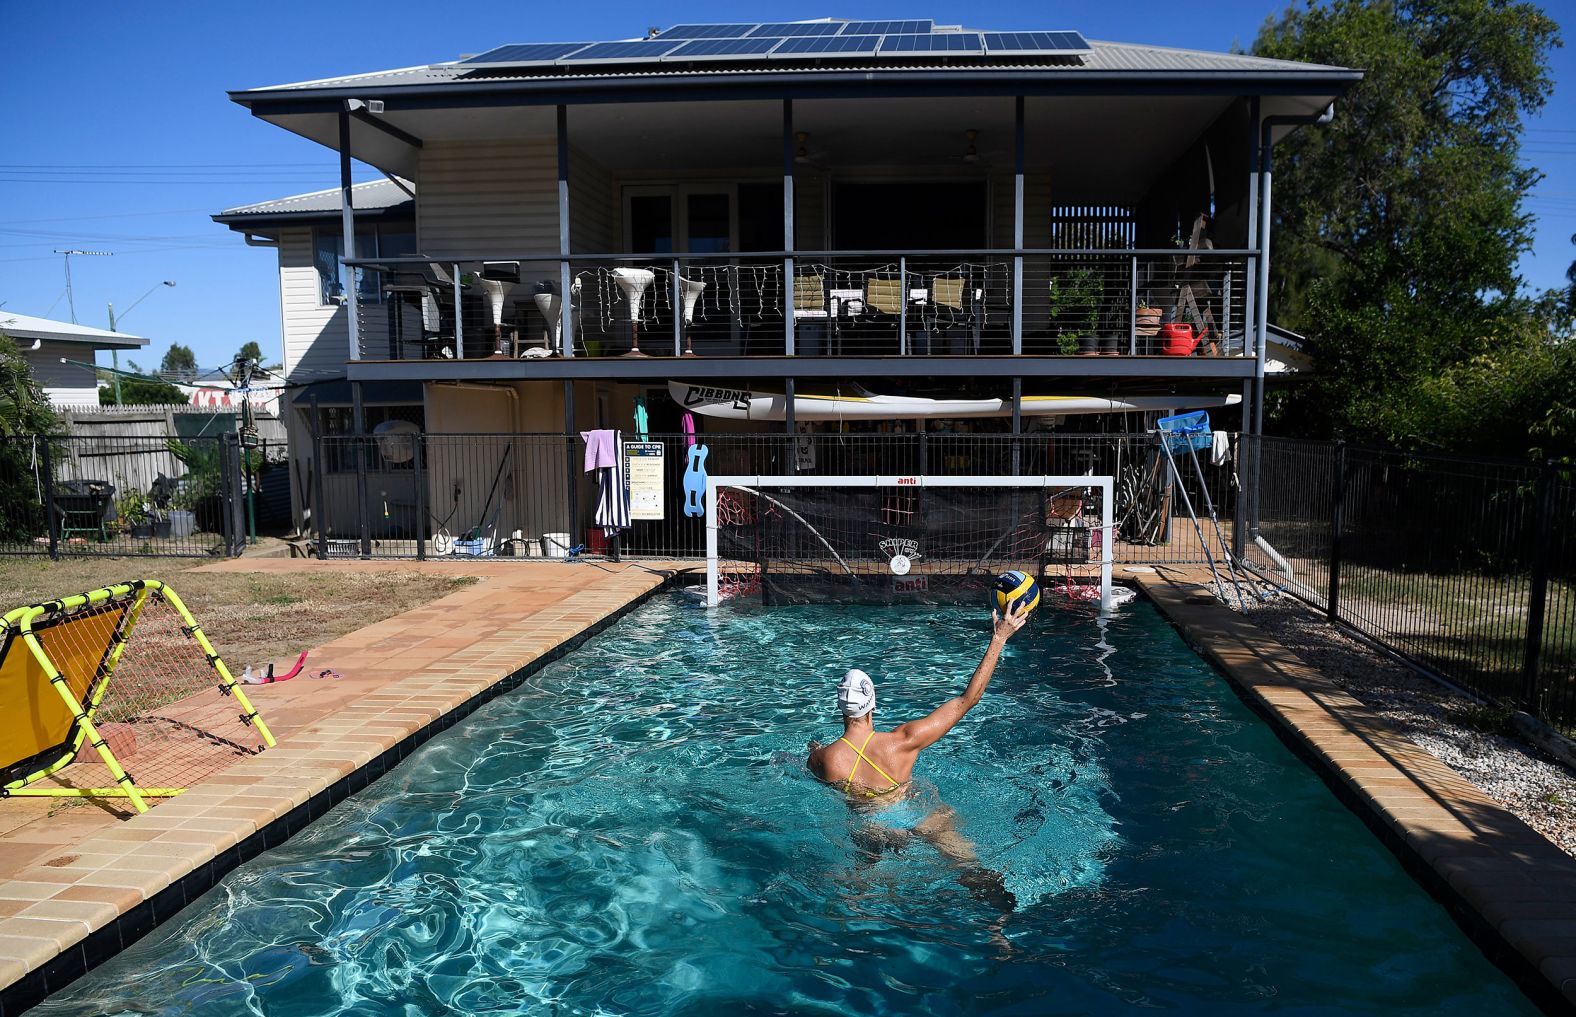 Water polo player Elle Armit practices shooting at her home in Townsville, Australia, on May 3.